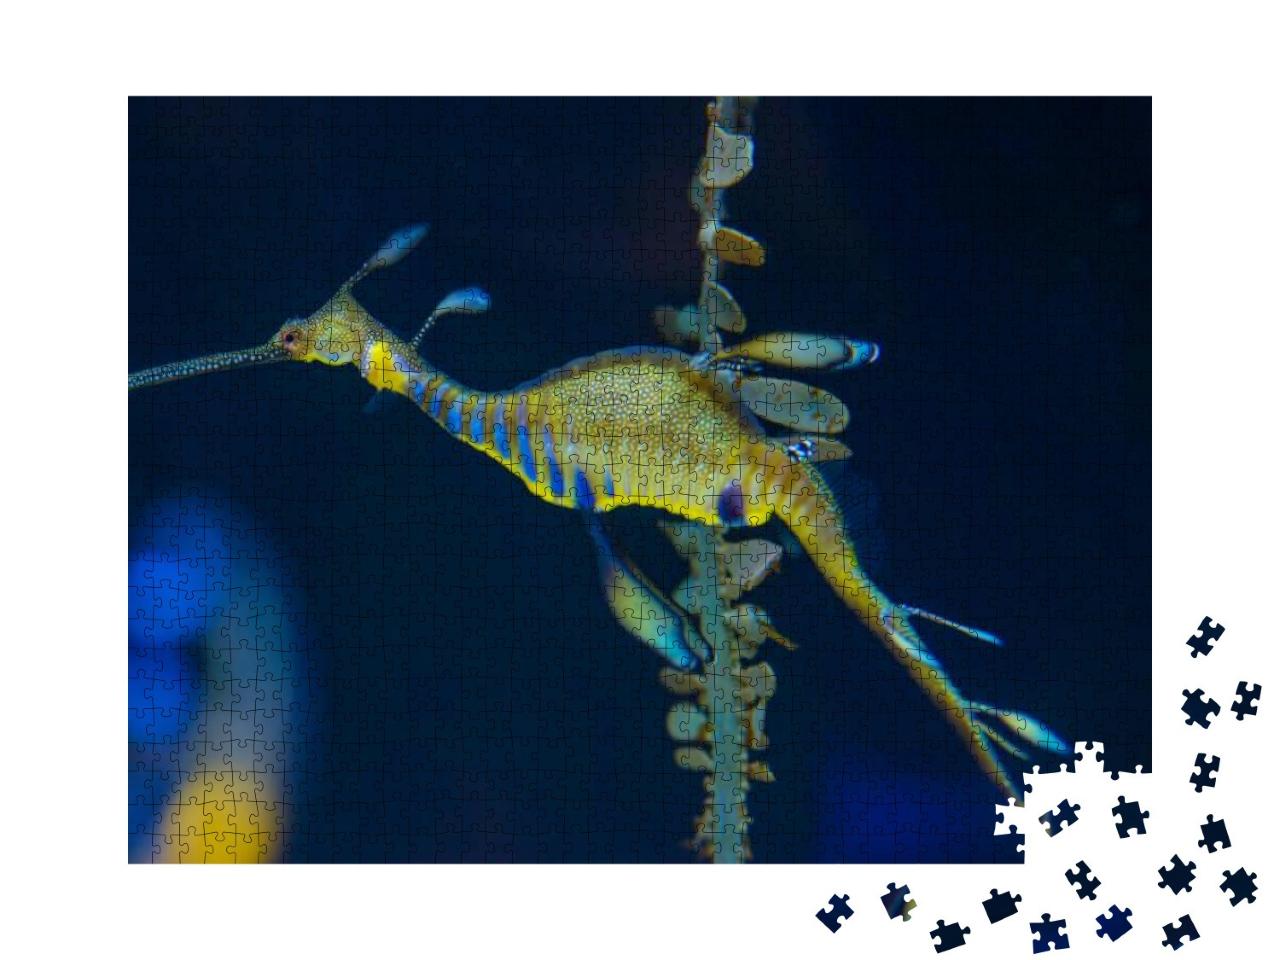 Seahorse in Colorful Salt Water Marine Aquarium... Jigsaw Puzzle with 1000 pieces